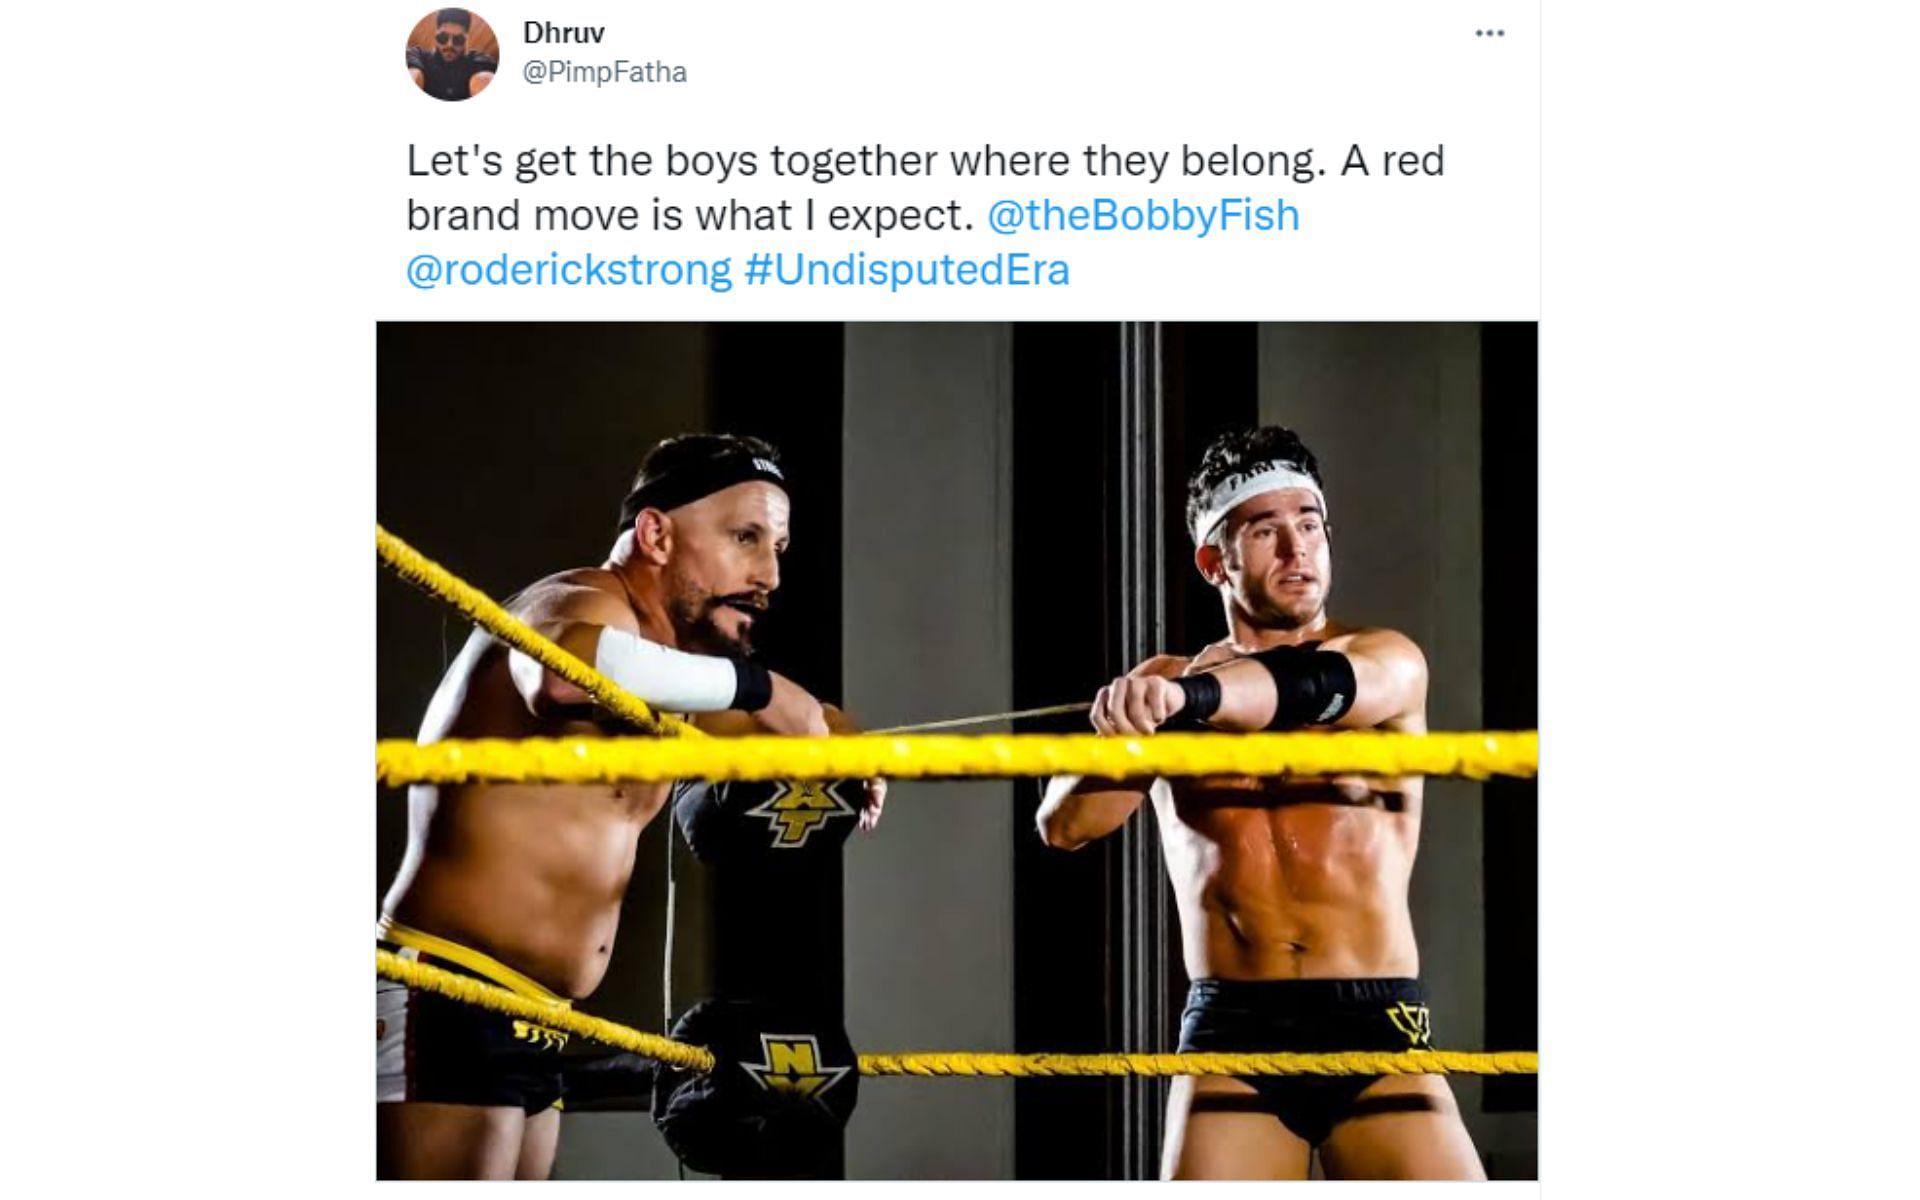 Bobby Fish was a member of an NXT faction